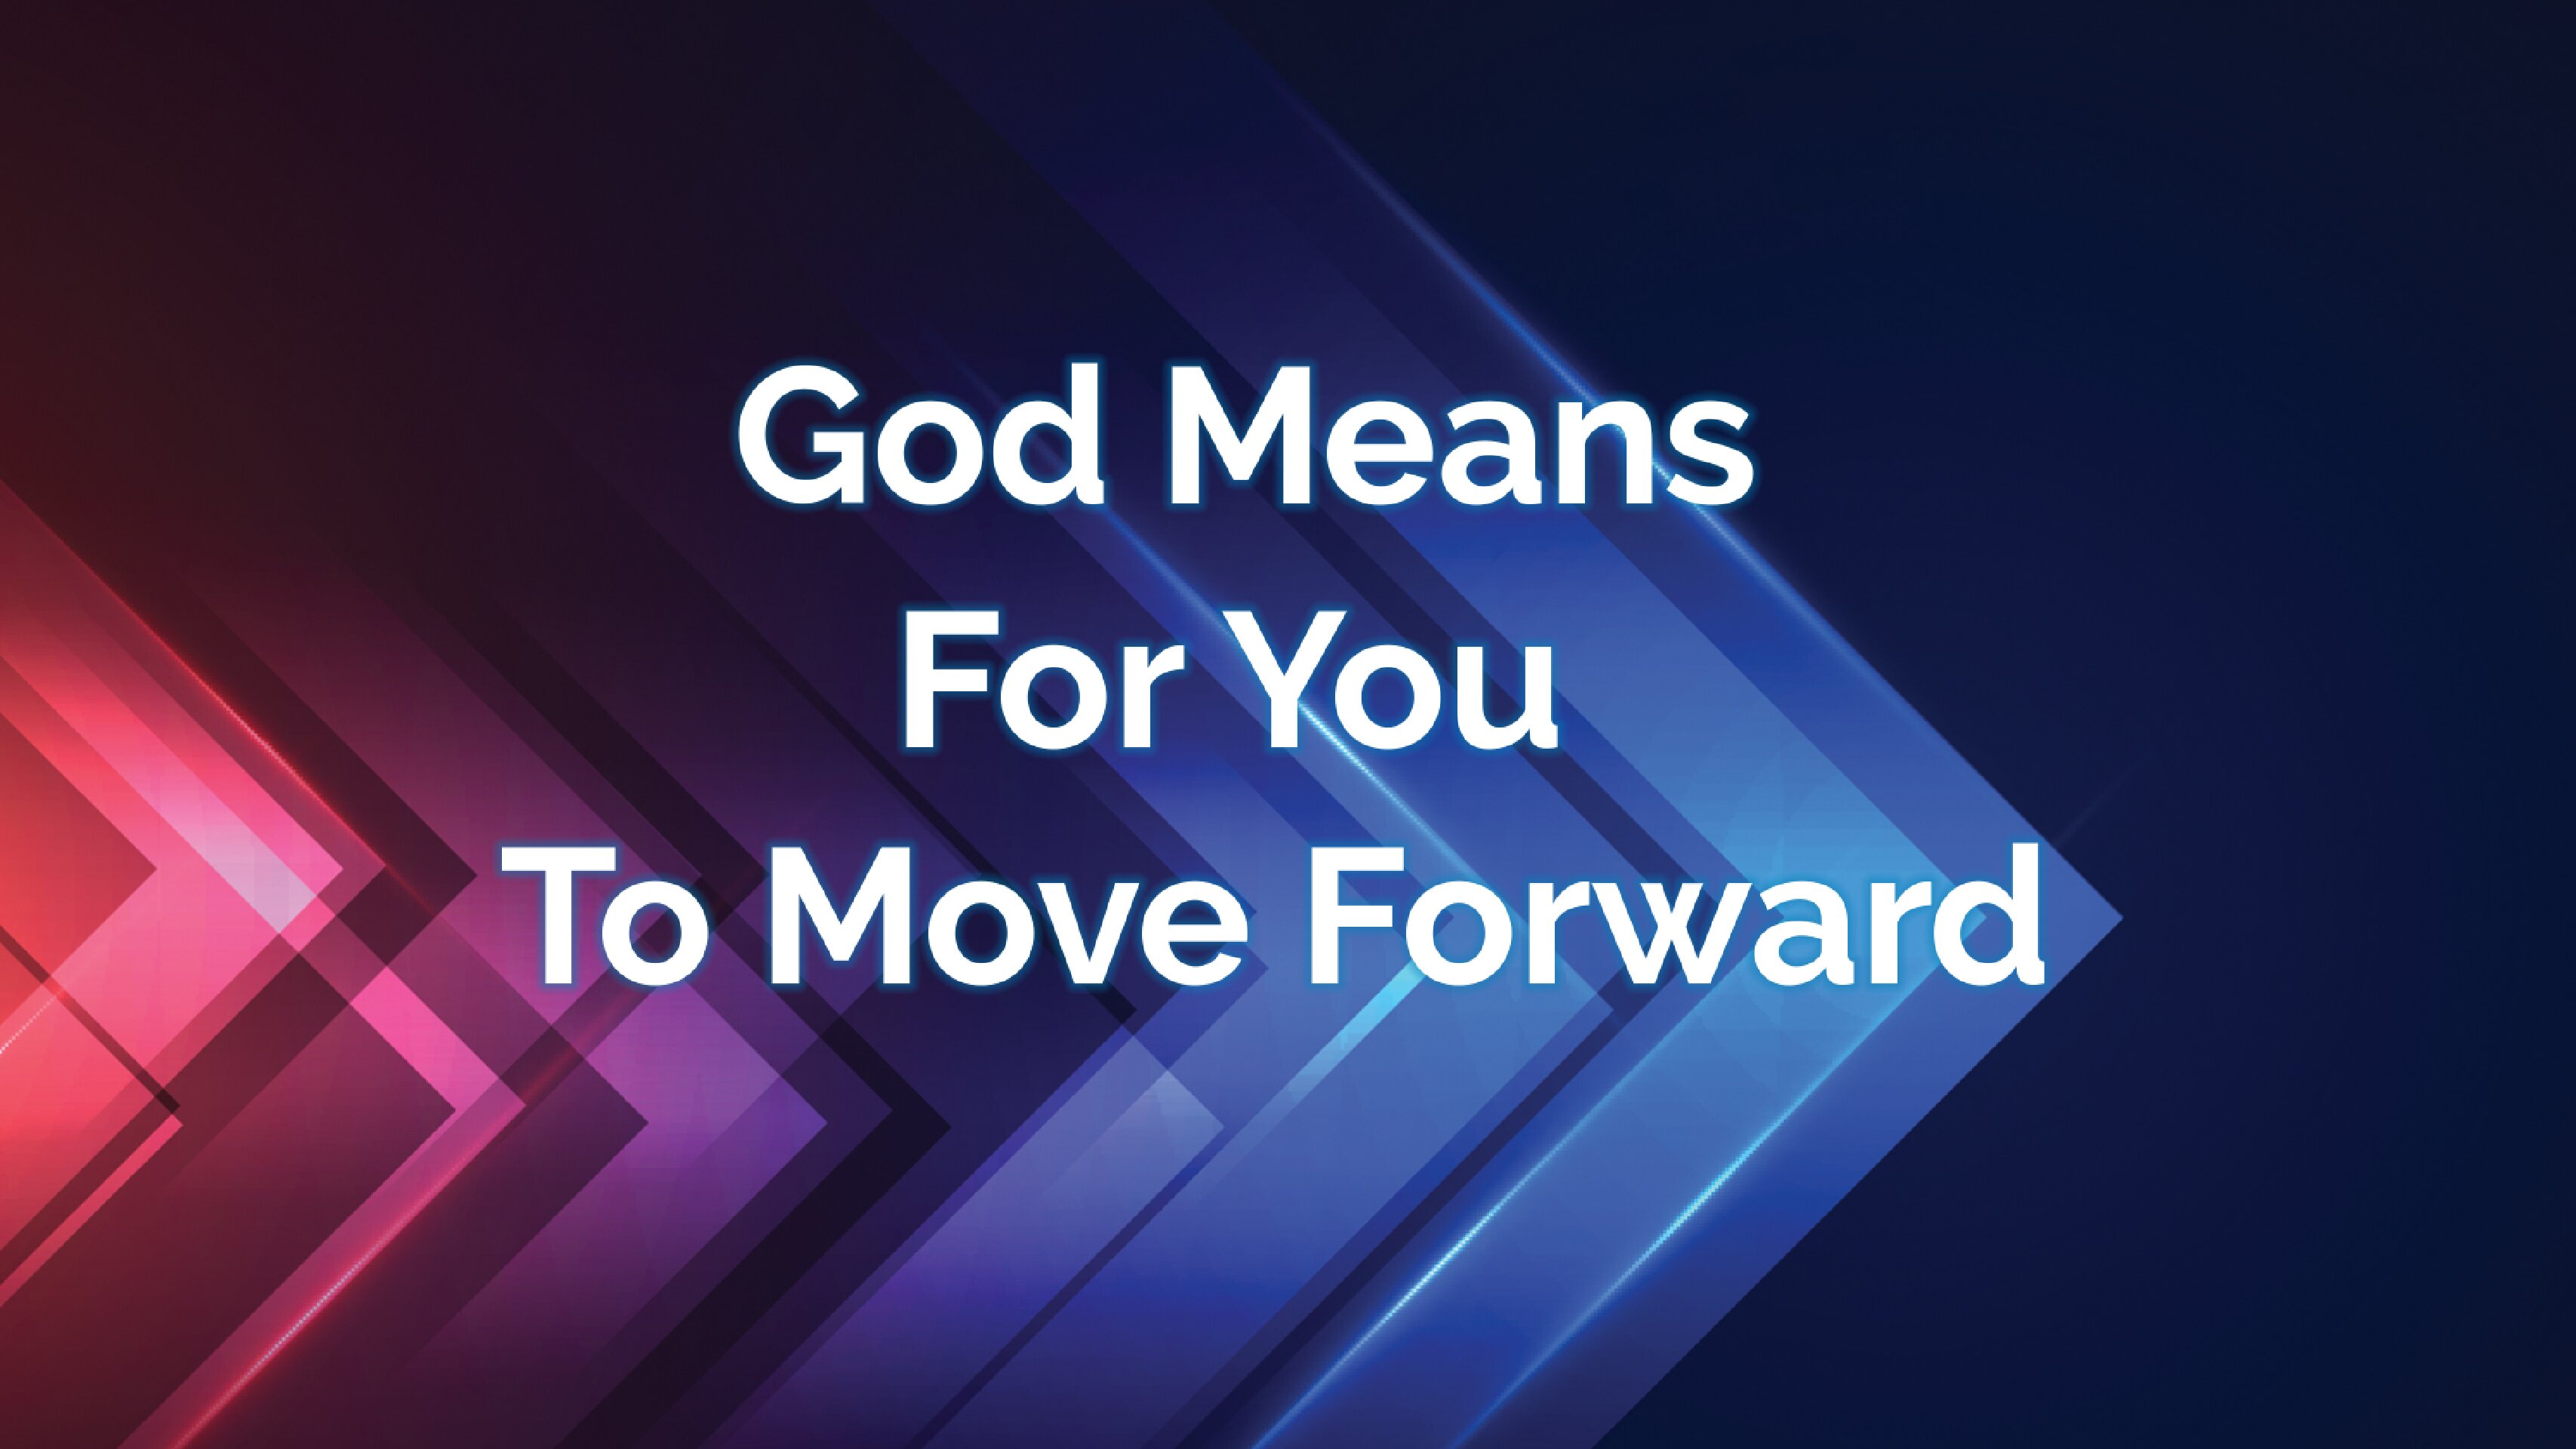 God Means for You to Move Forward